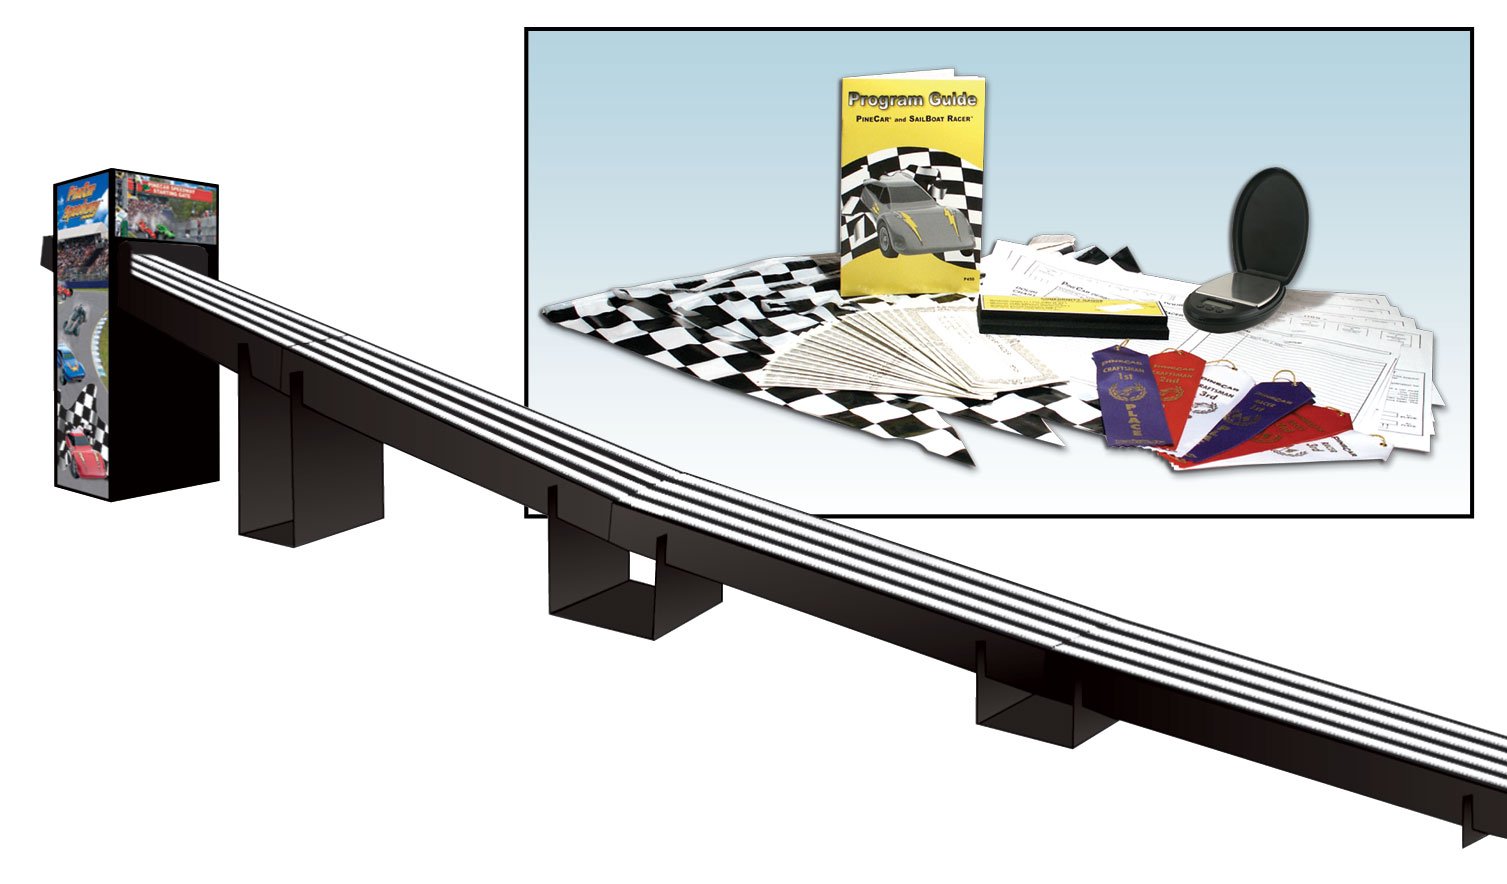 PineCar Race Package (US Only) - The PineCar Derby Race Package includes everything you need to hold your own PineCar Derby including a 32' (9